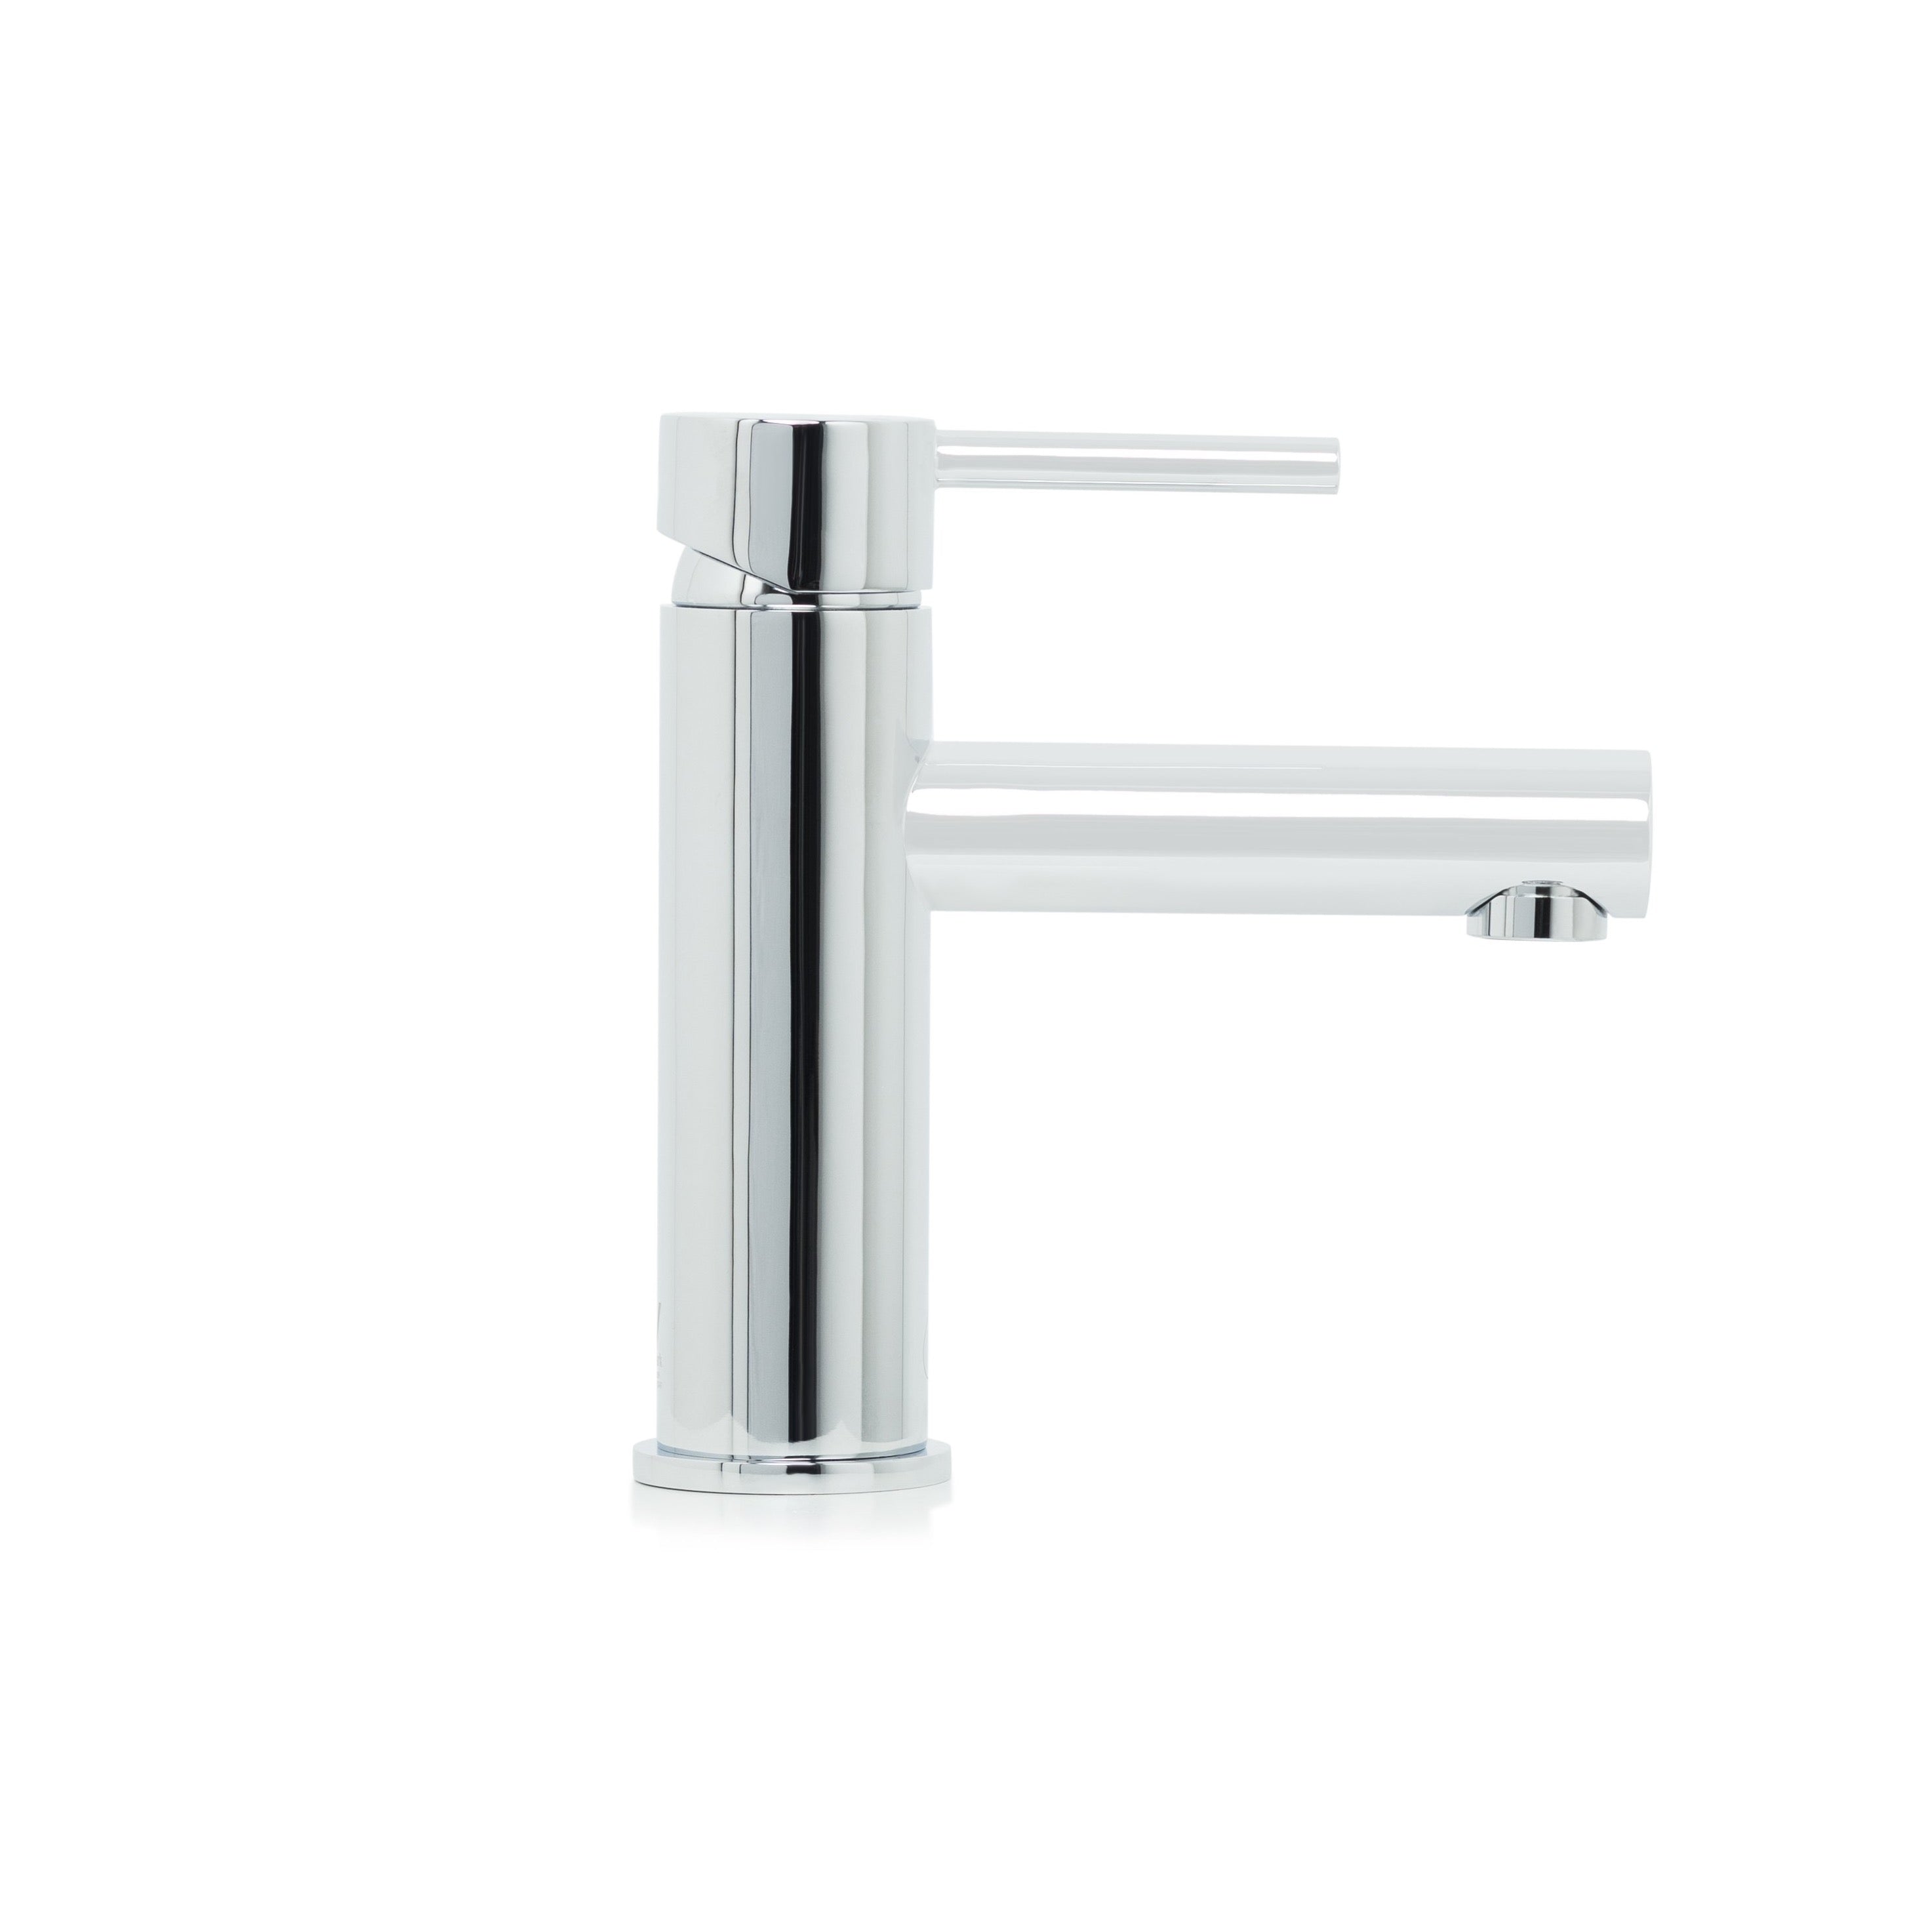 Bronte Pin Lever Basin Mixer with Straight Spout in Chrome